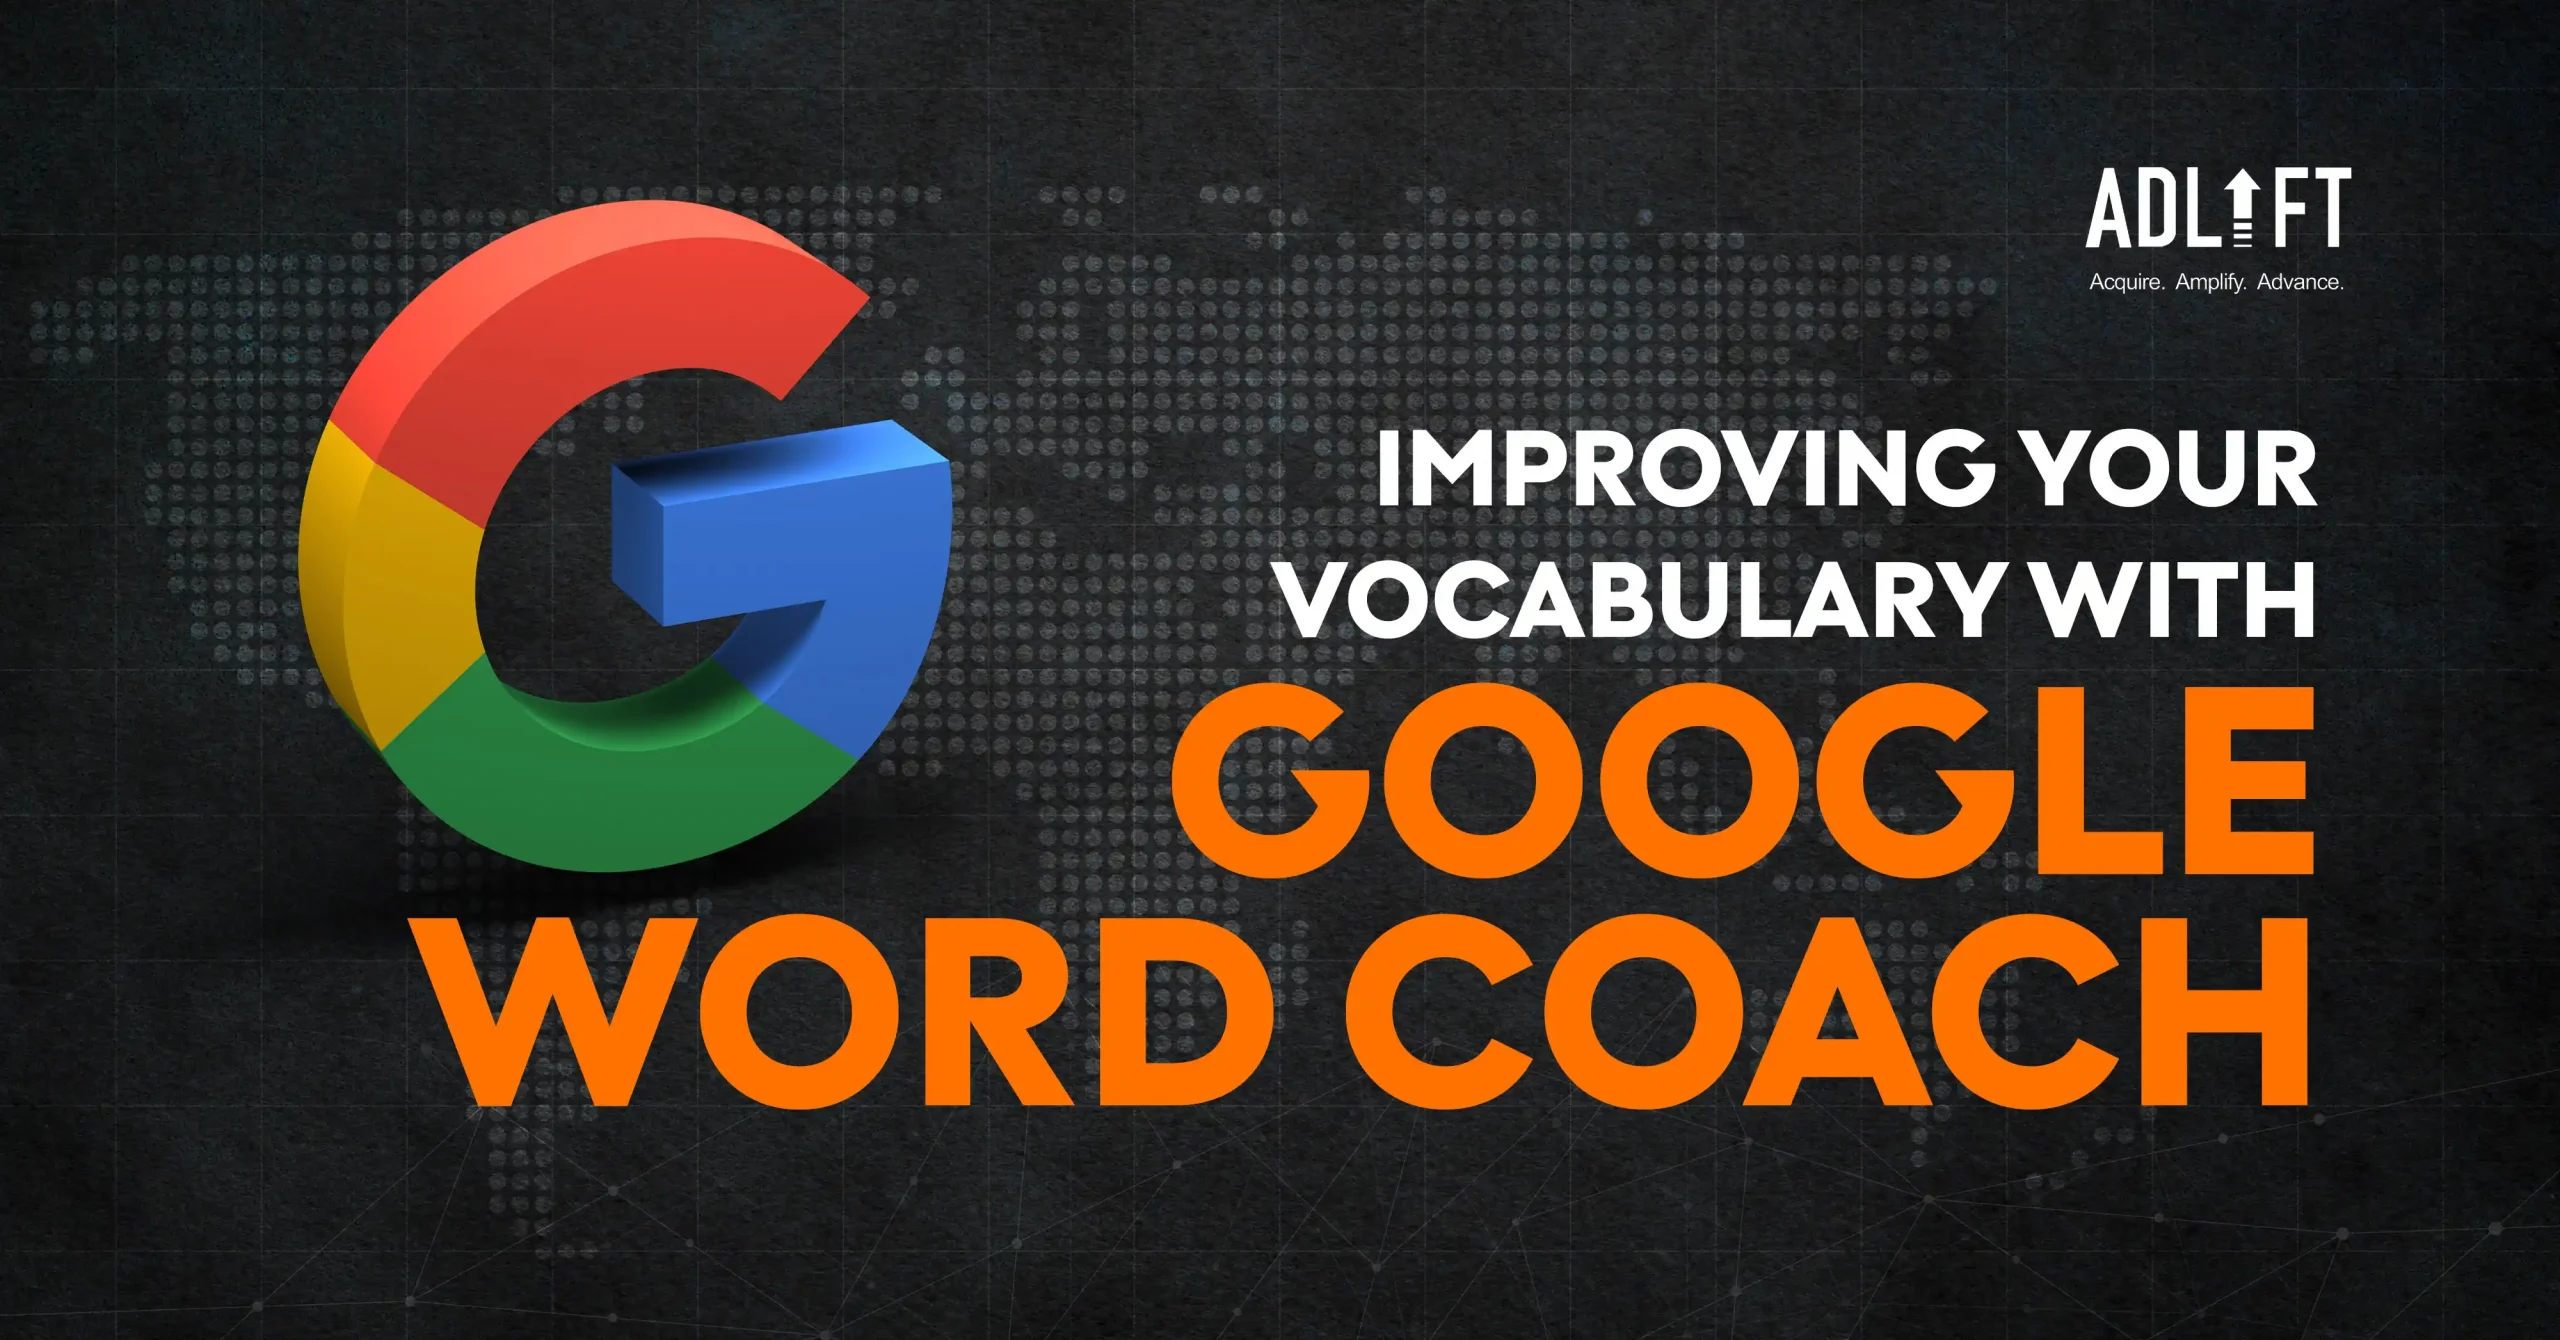 Google Word Coach: A Tool for Improving Your Vocabulary